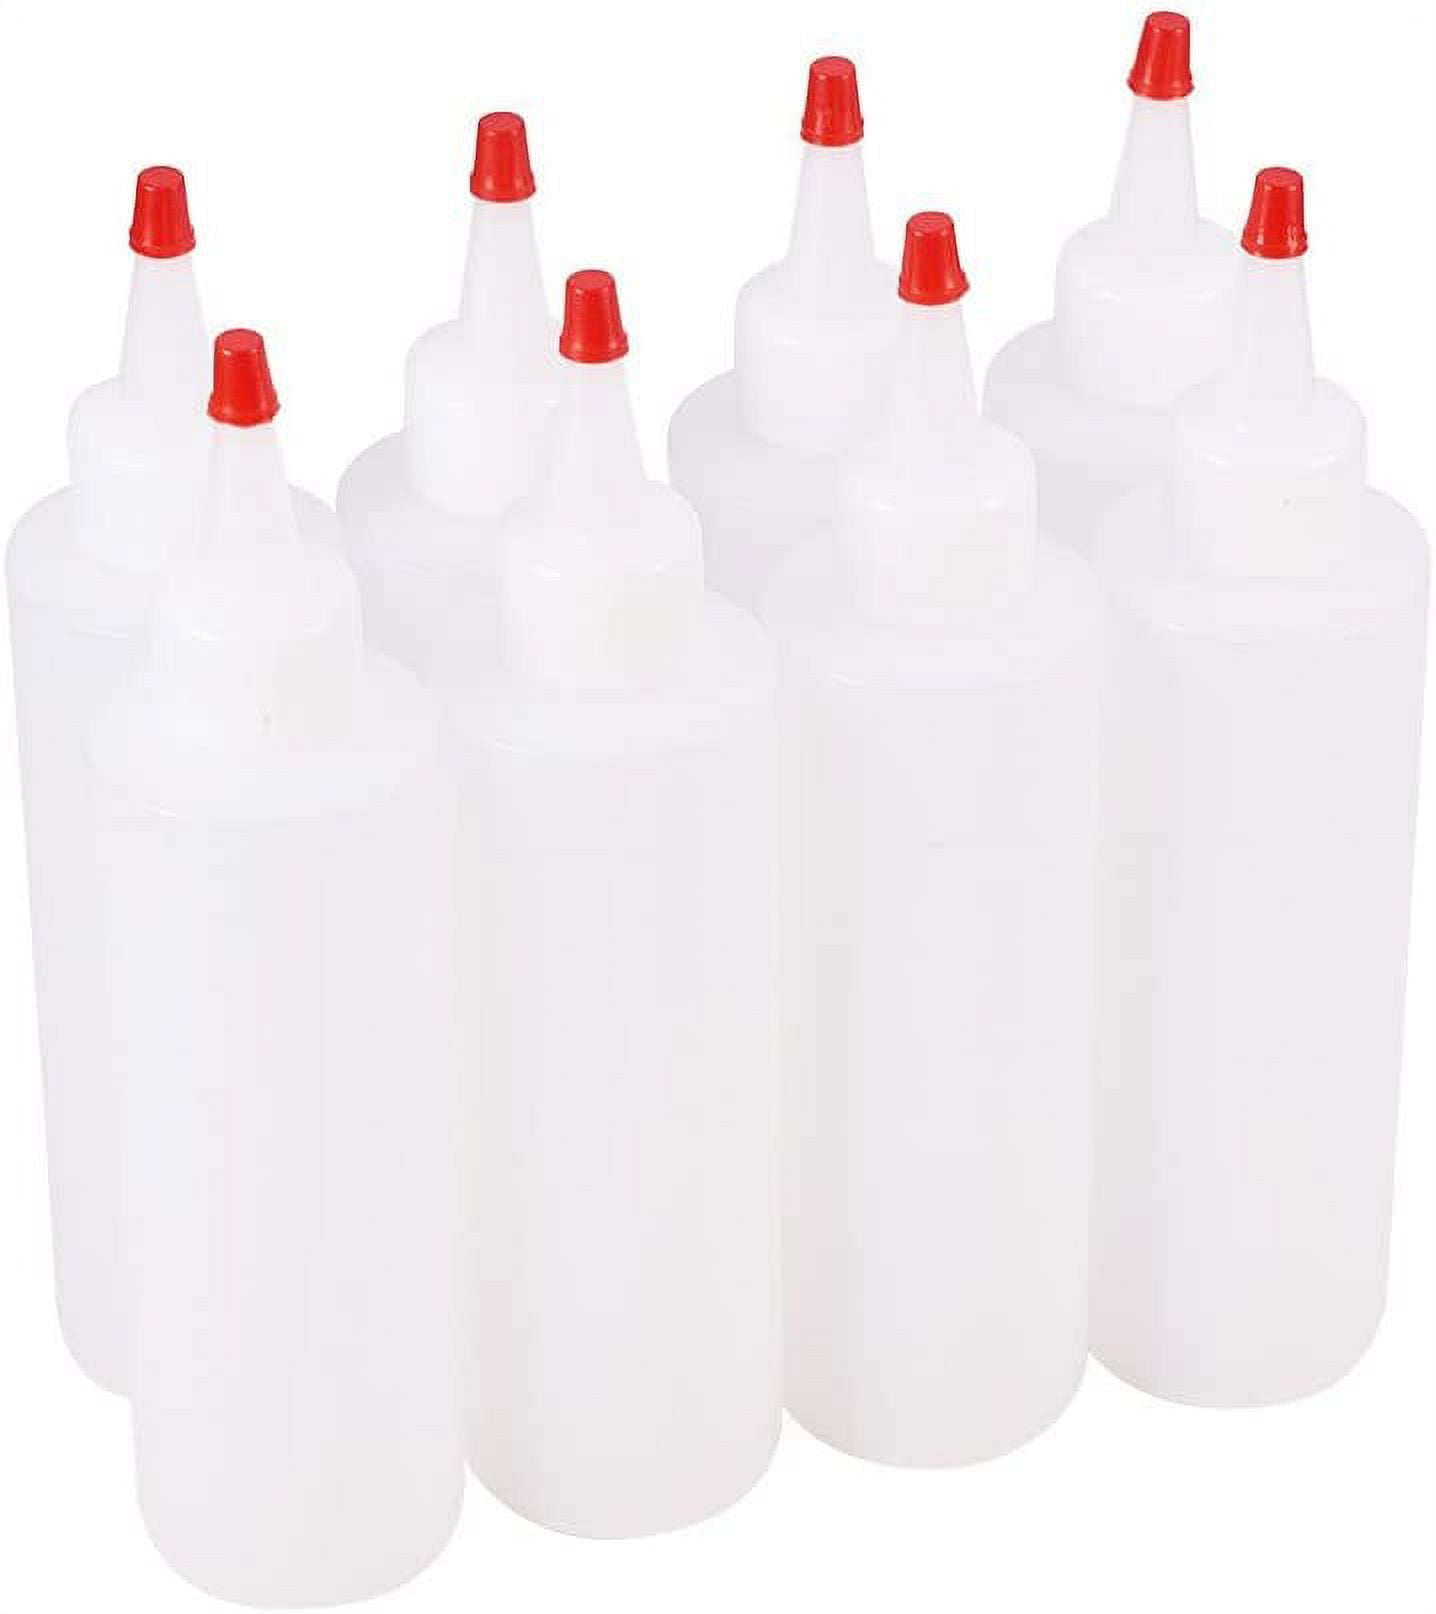 BUBABOX 10 Pcs 4 Oz Plastic Squeeze Bottles, Squirt Bottles with Twist Top  Cap and Funnels, Clear Pour Bottle Plastic, Paint Squeeze Bottle for Paint,  Glue, Crafts, Ink, Liquids, Oil 